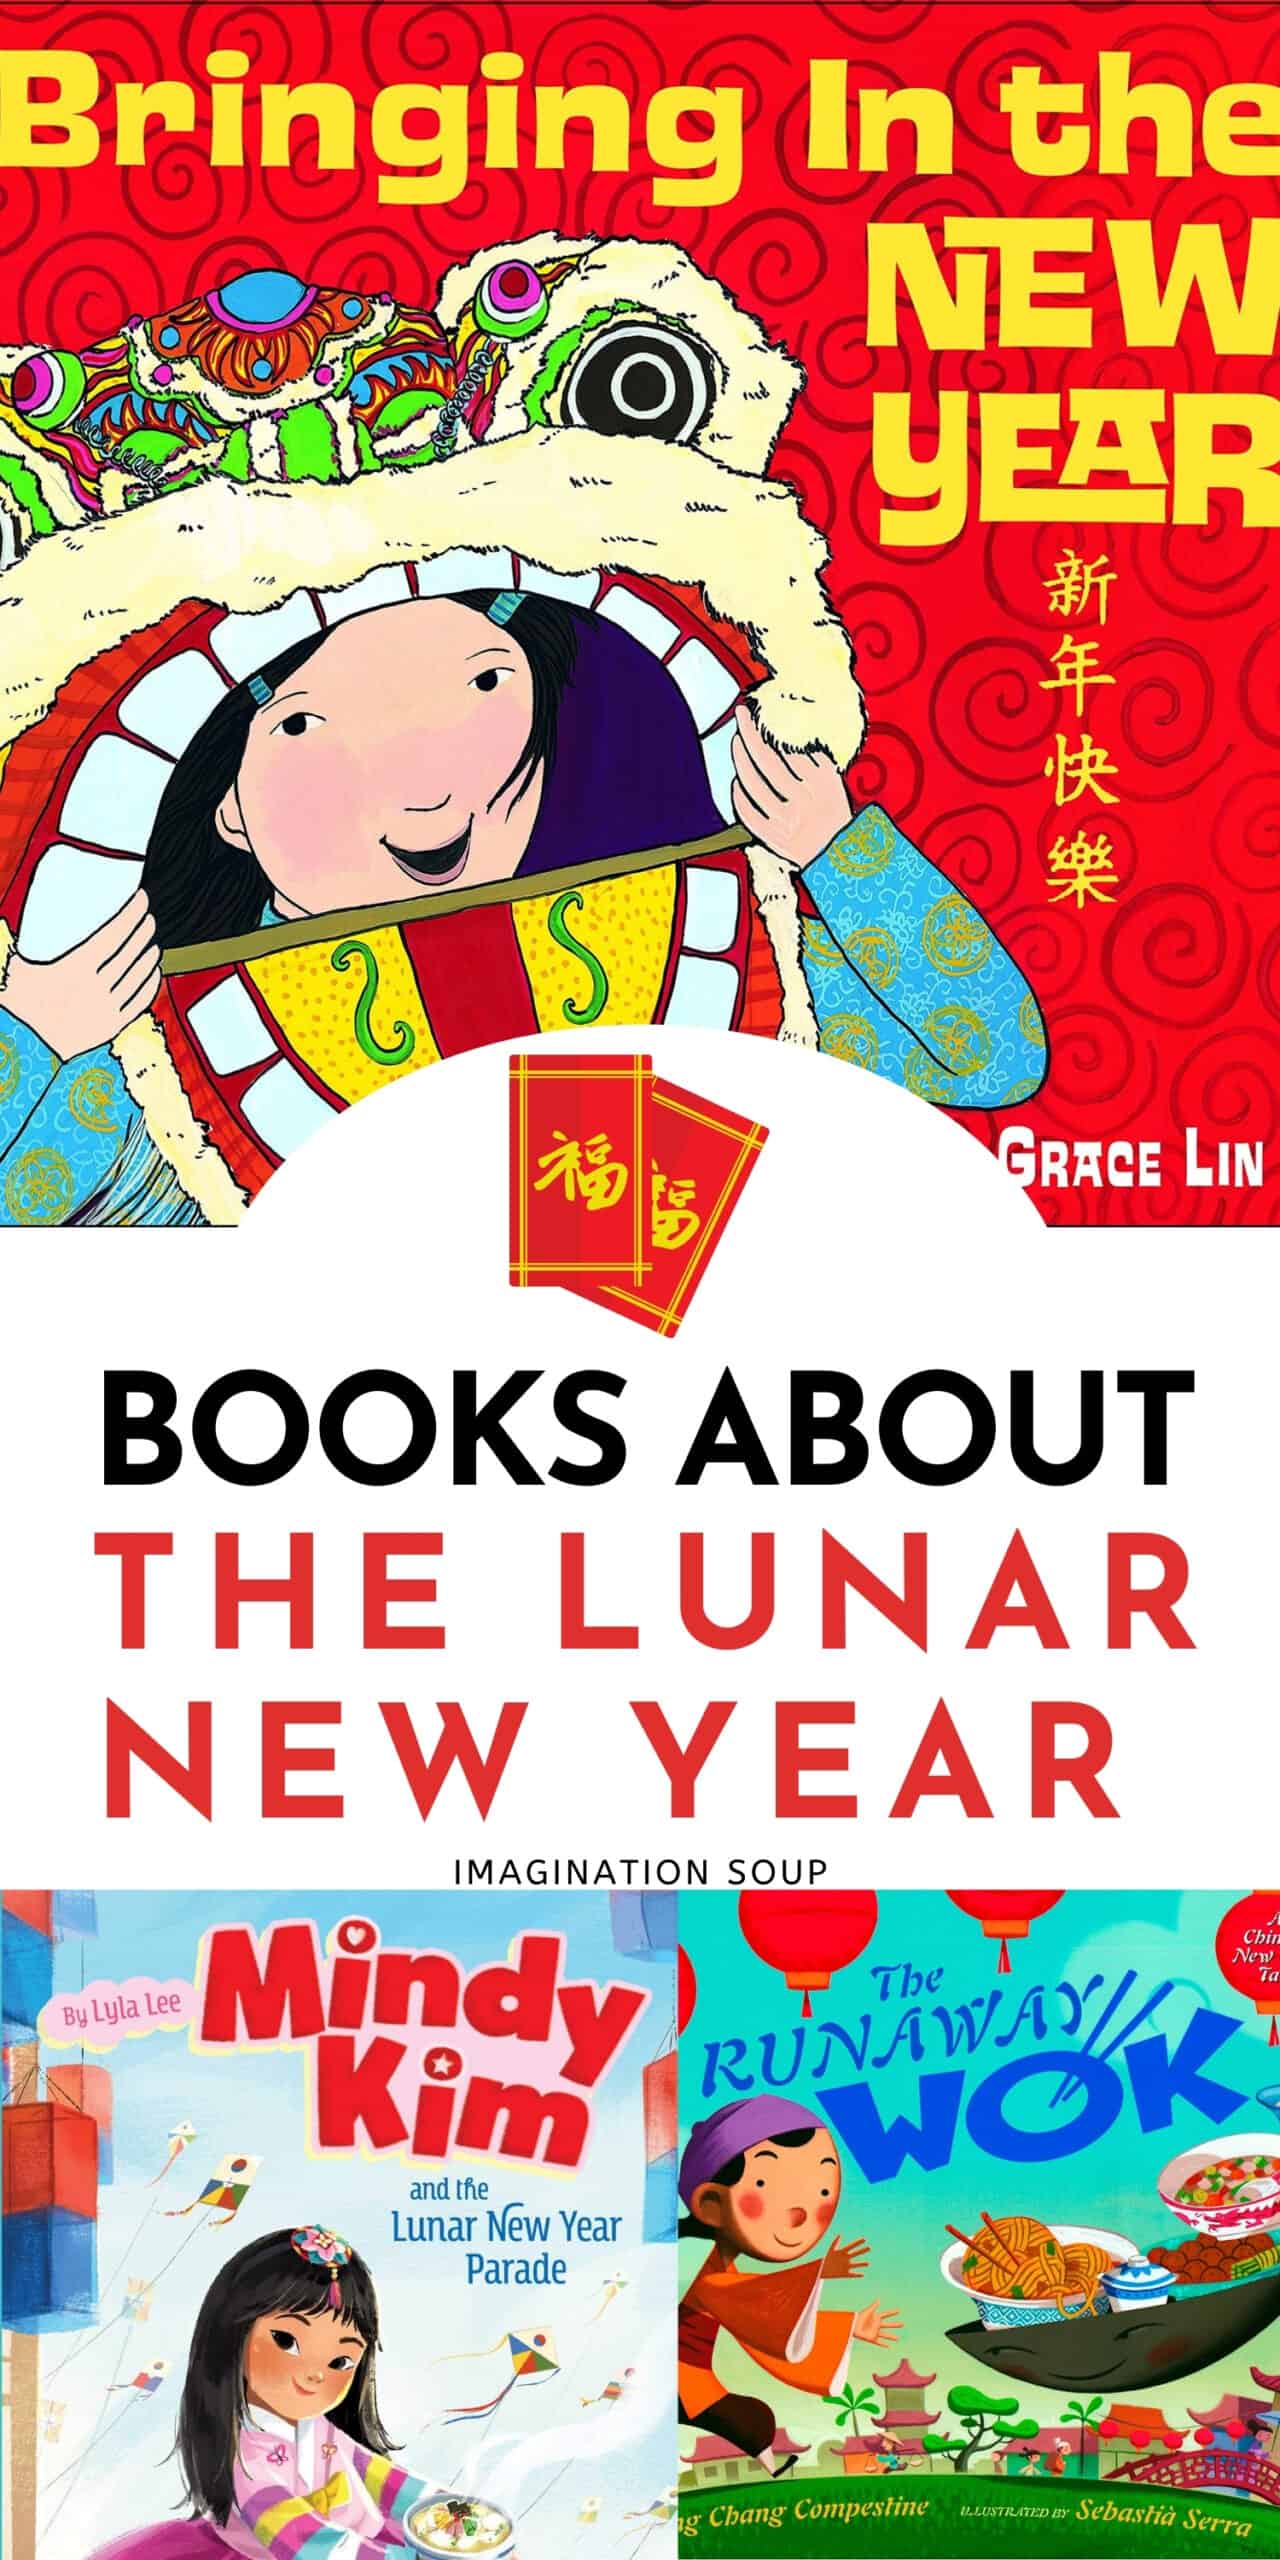 Books about the Lunar New Year